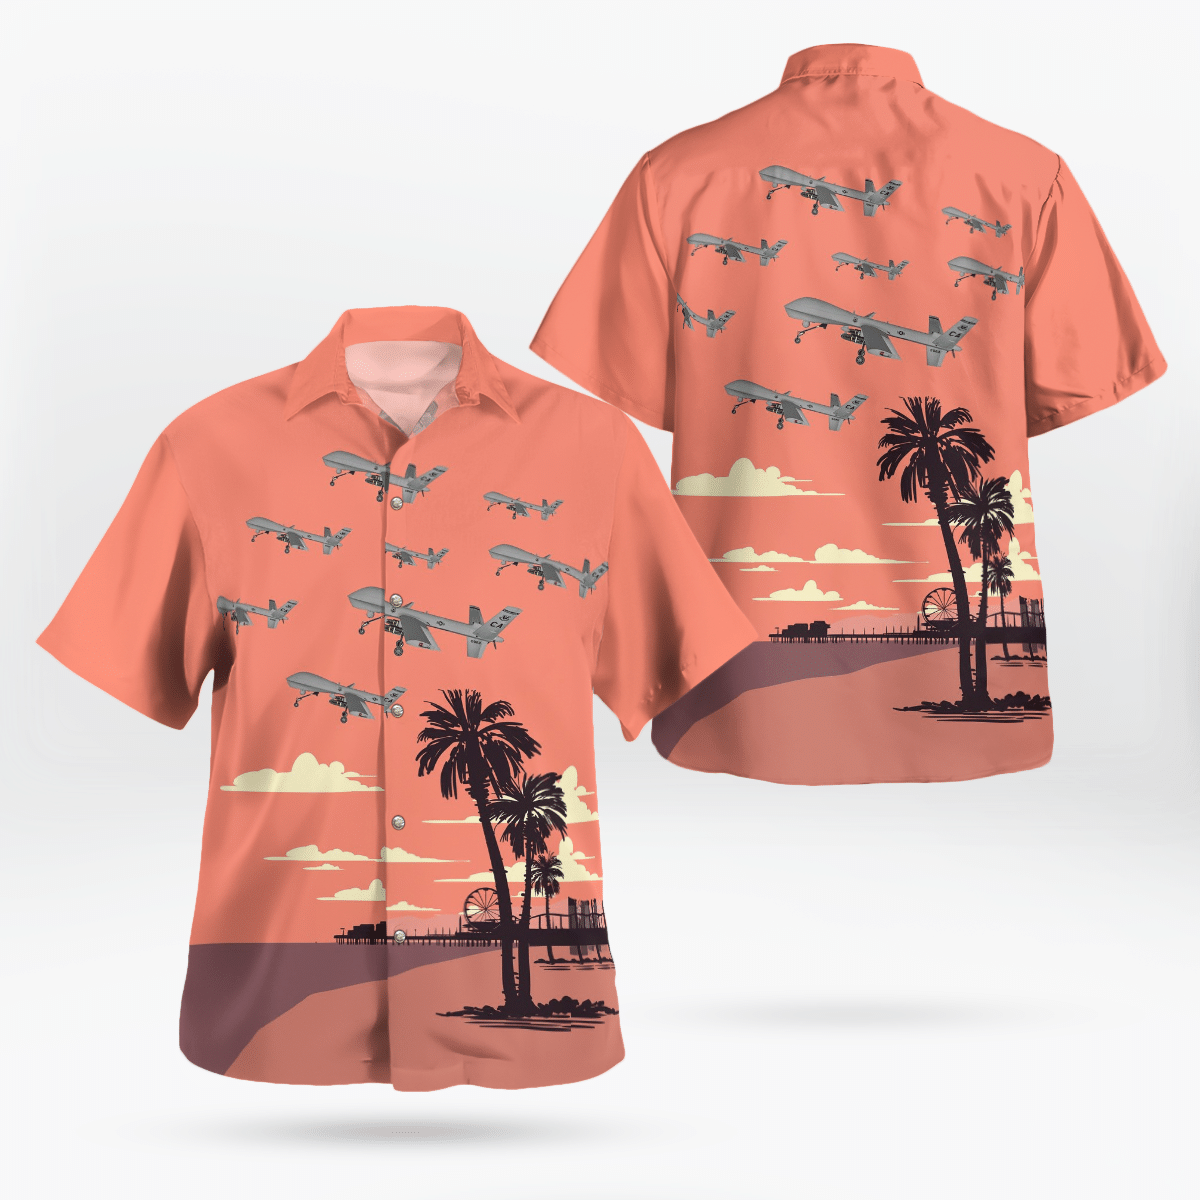 Consider getting these Hawaiian Shirt for your friends 99